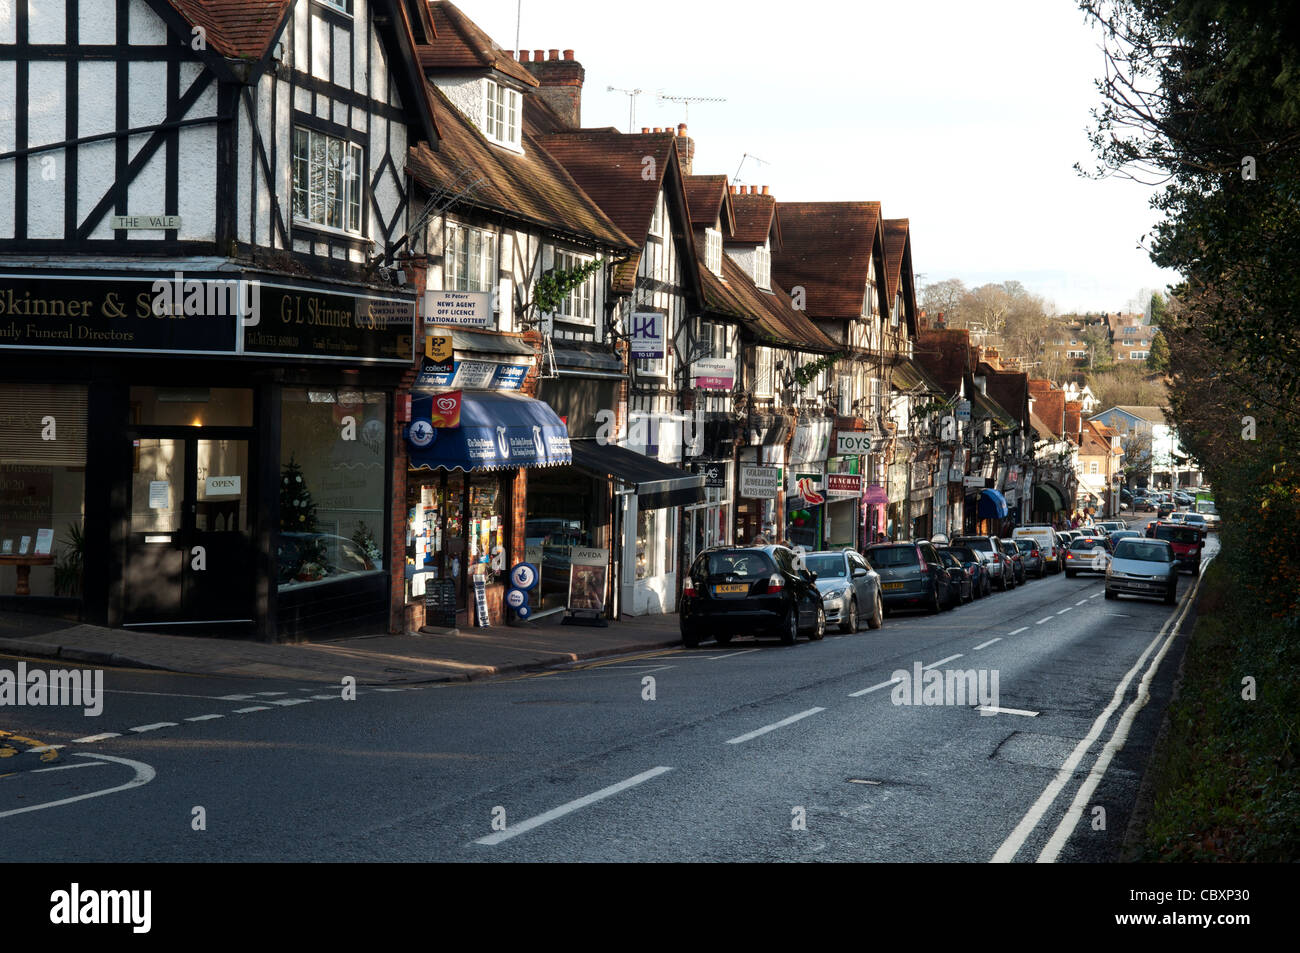 A traditional row of small shops and businesses in Market Place Chalfont St Peter village centre Bucks UK Stock Photo